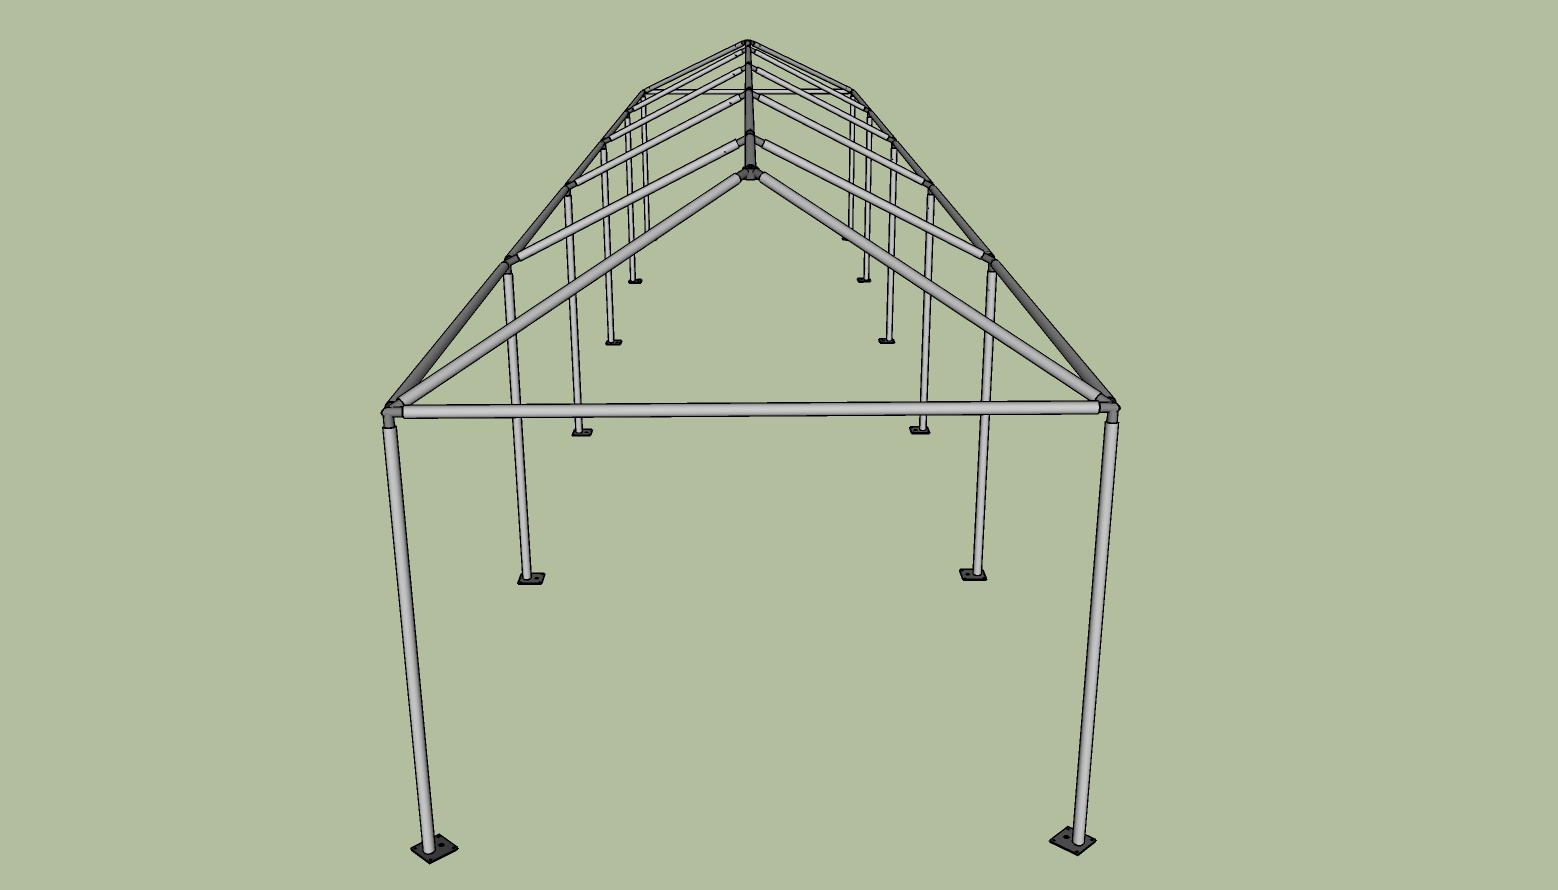 10x50 frame tent side view